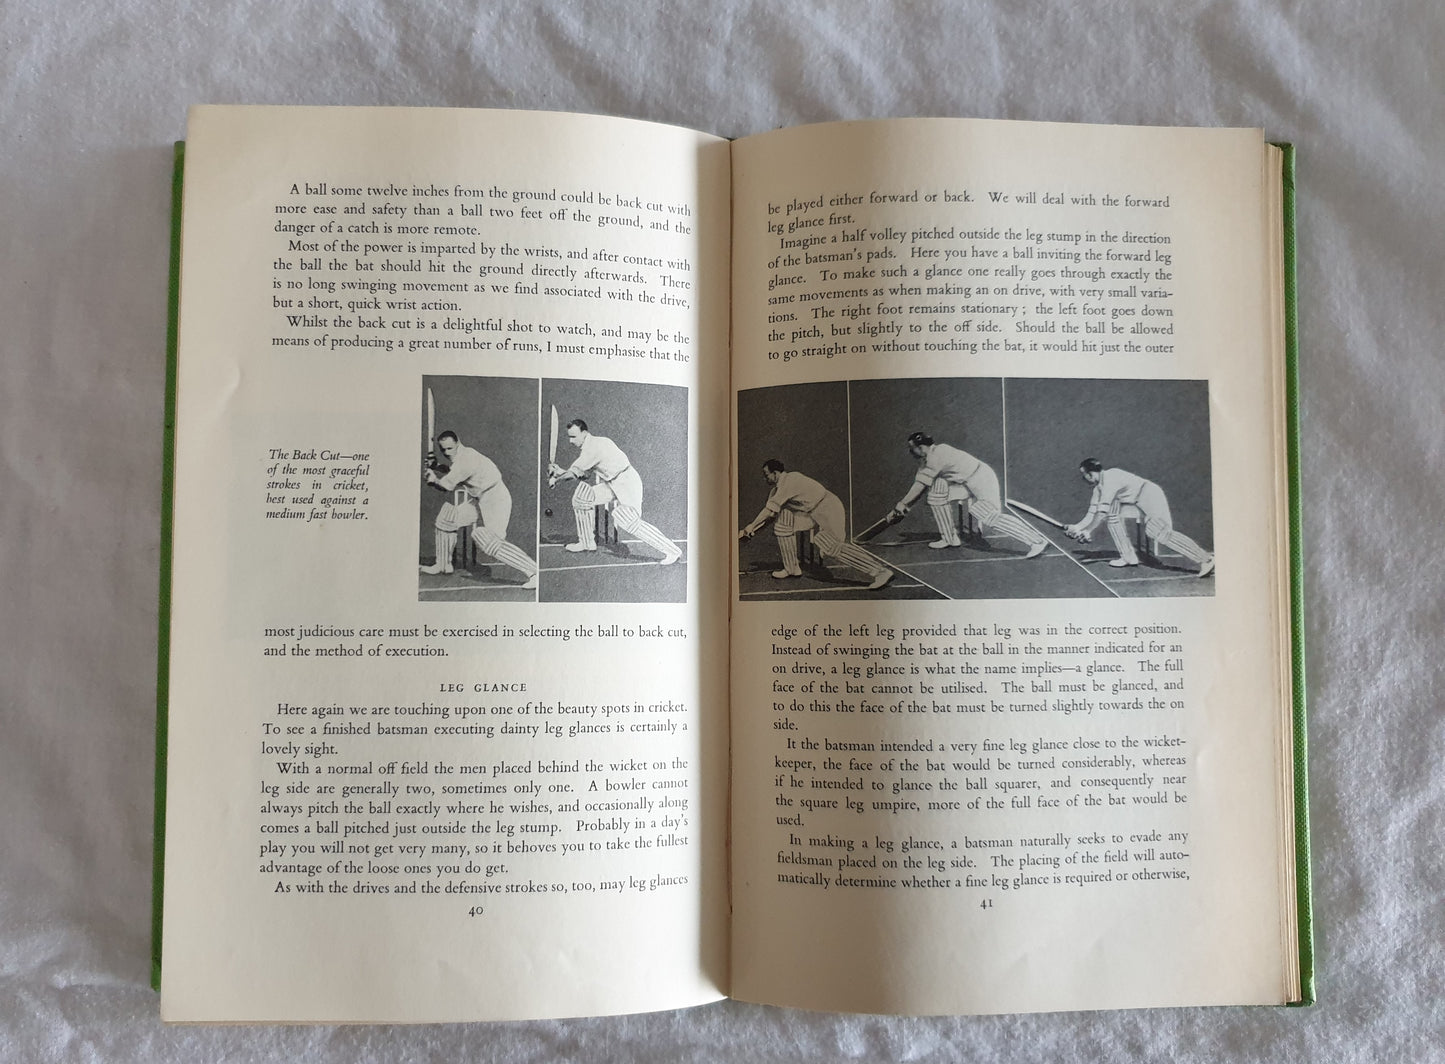 How To Play Cricket by Don Bradman